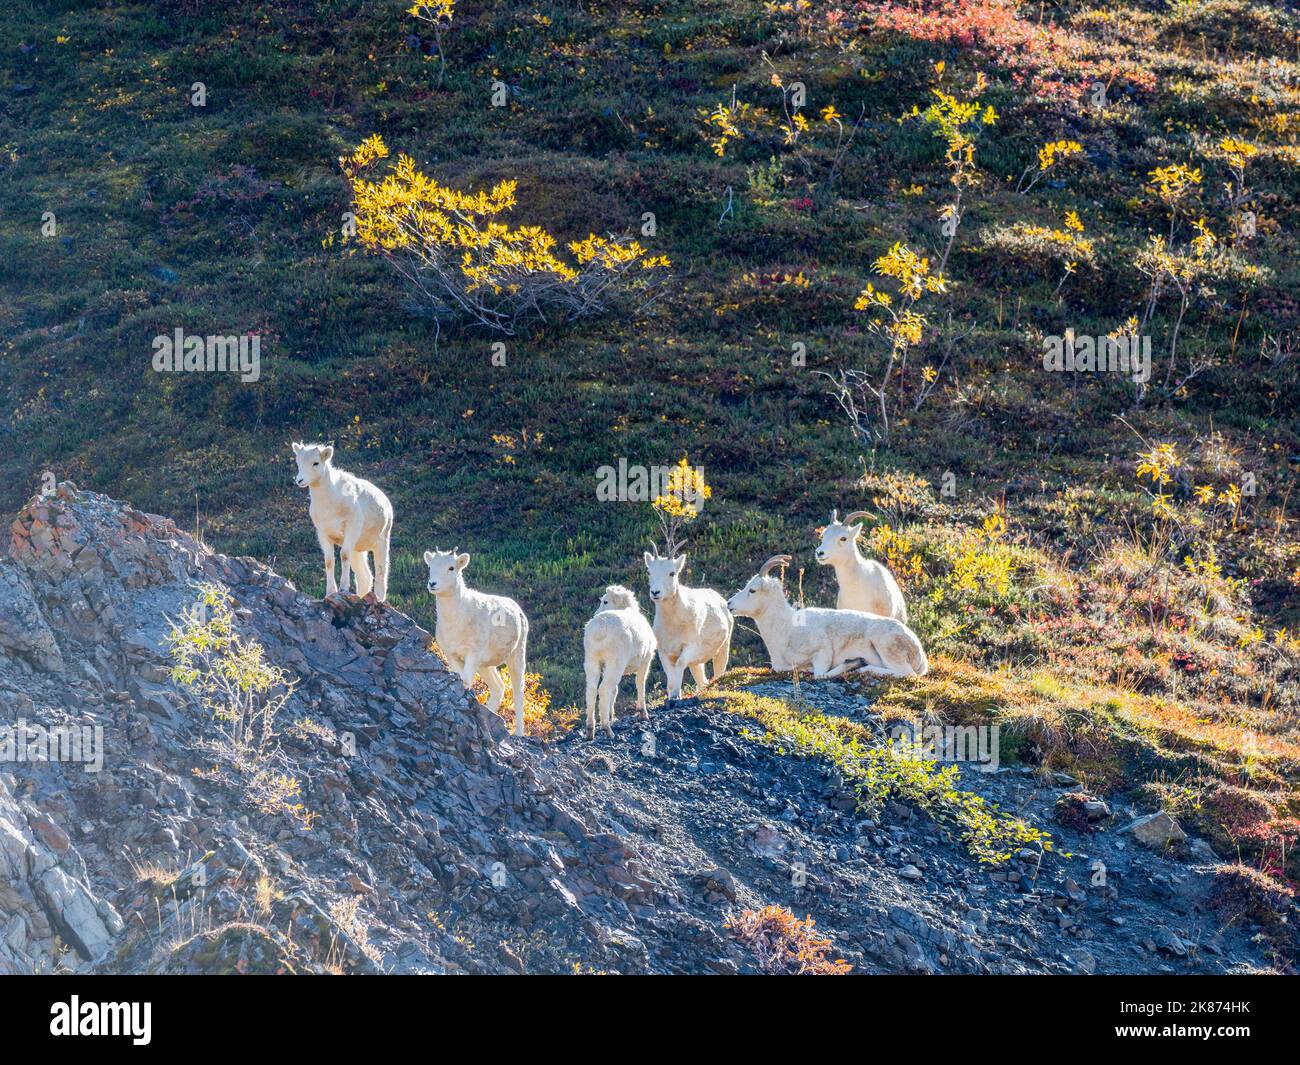 A small group of Dall sheep (Ovis dalli) grazing on a mountainside in Denali National Park, Alaska, United States of America, North America Stock Photo